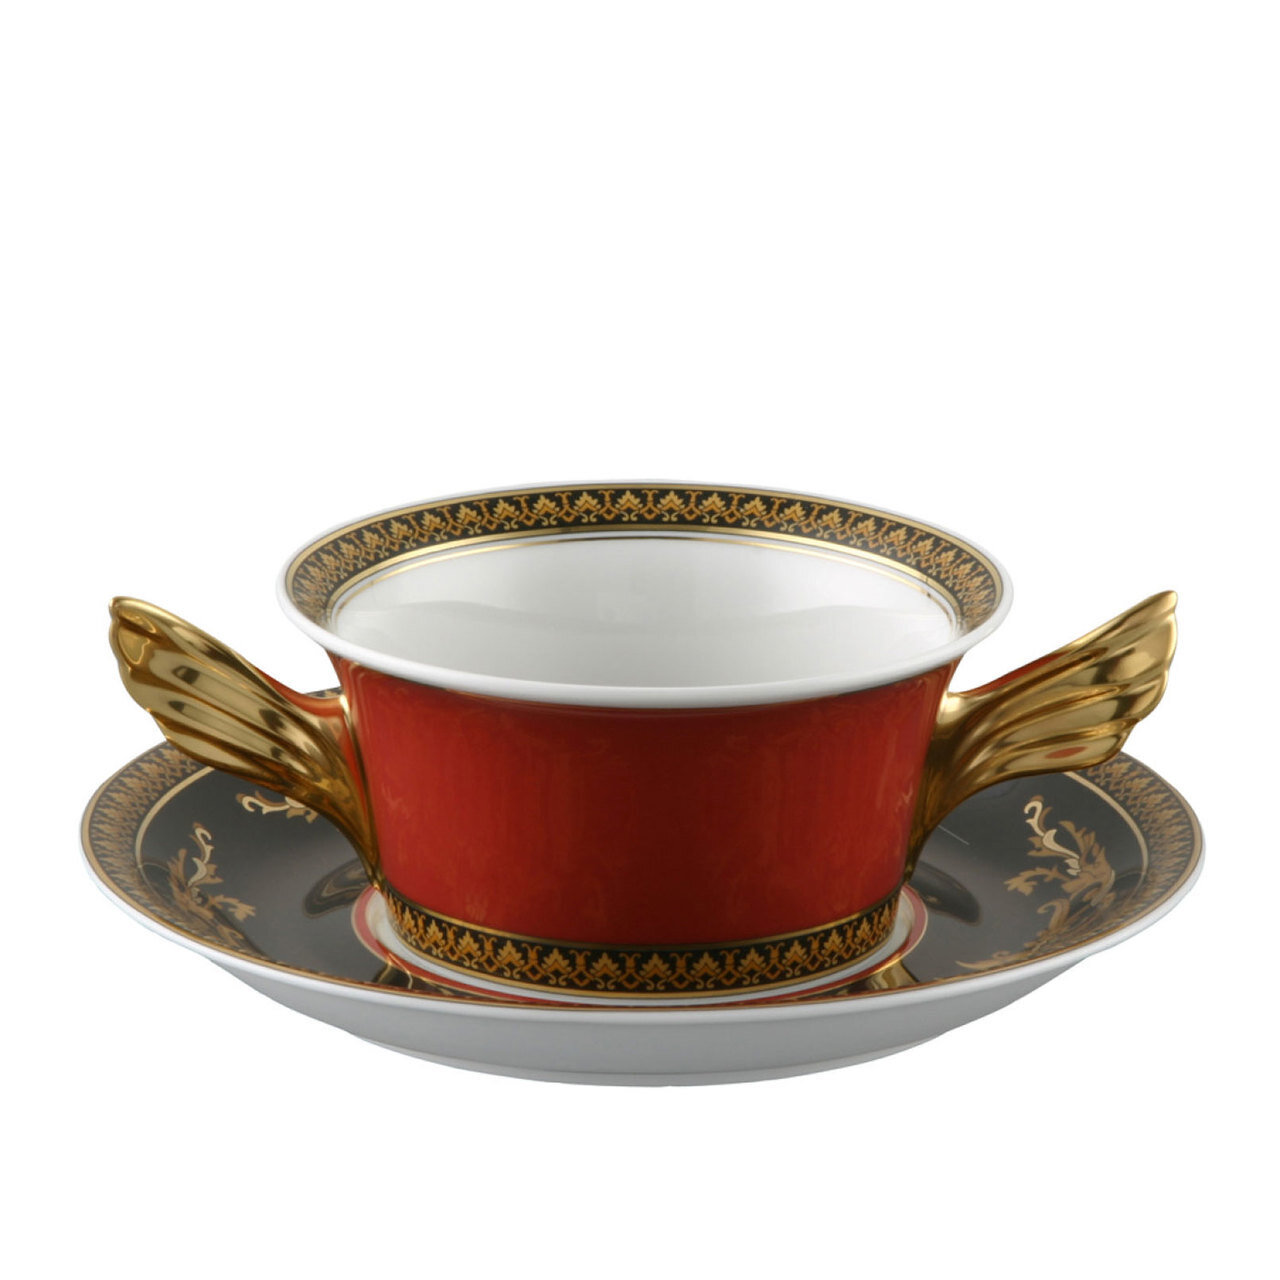 Versace Medusa Red Cream Soup Cup and Saucer 6 3/4 Inch 10 oz.